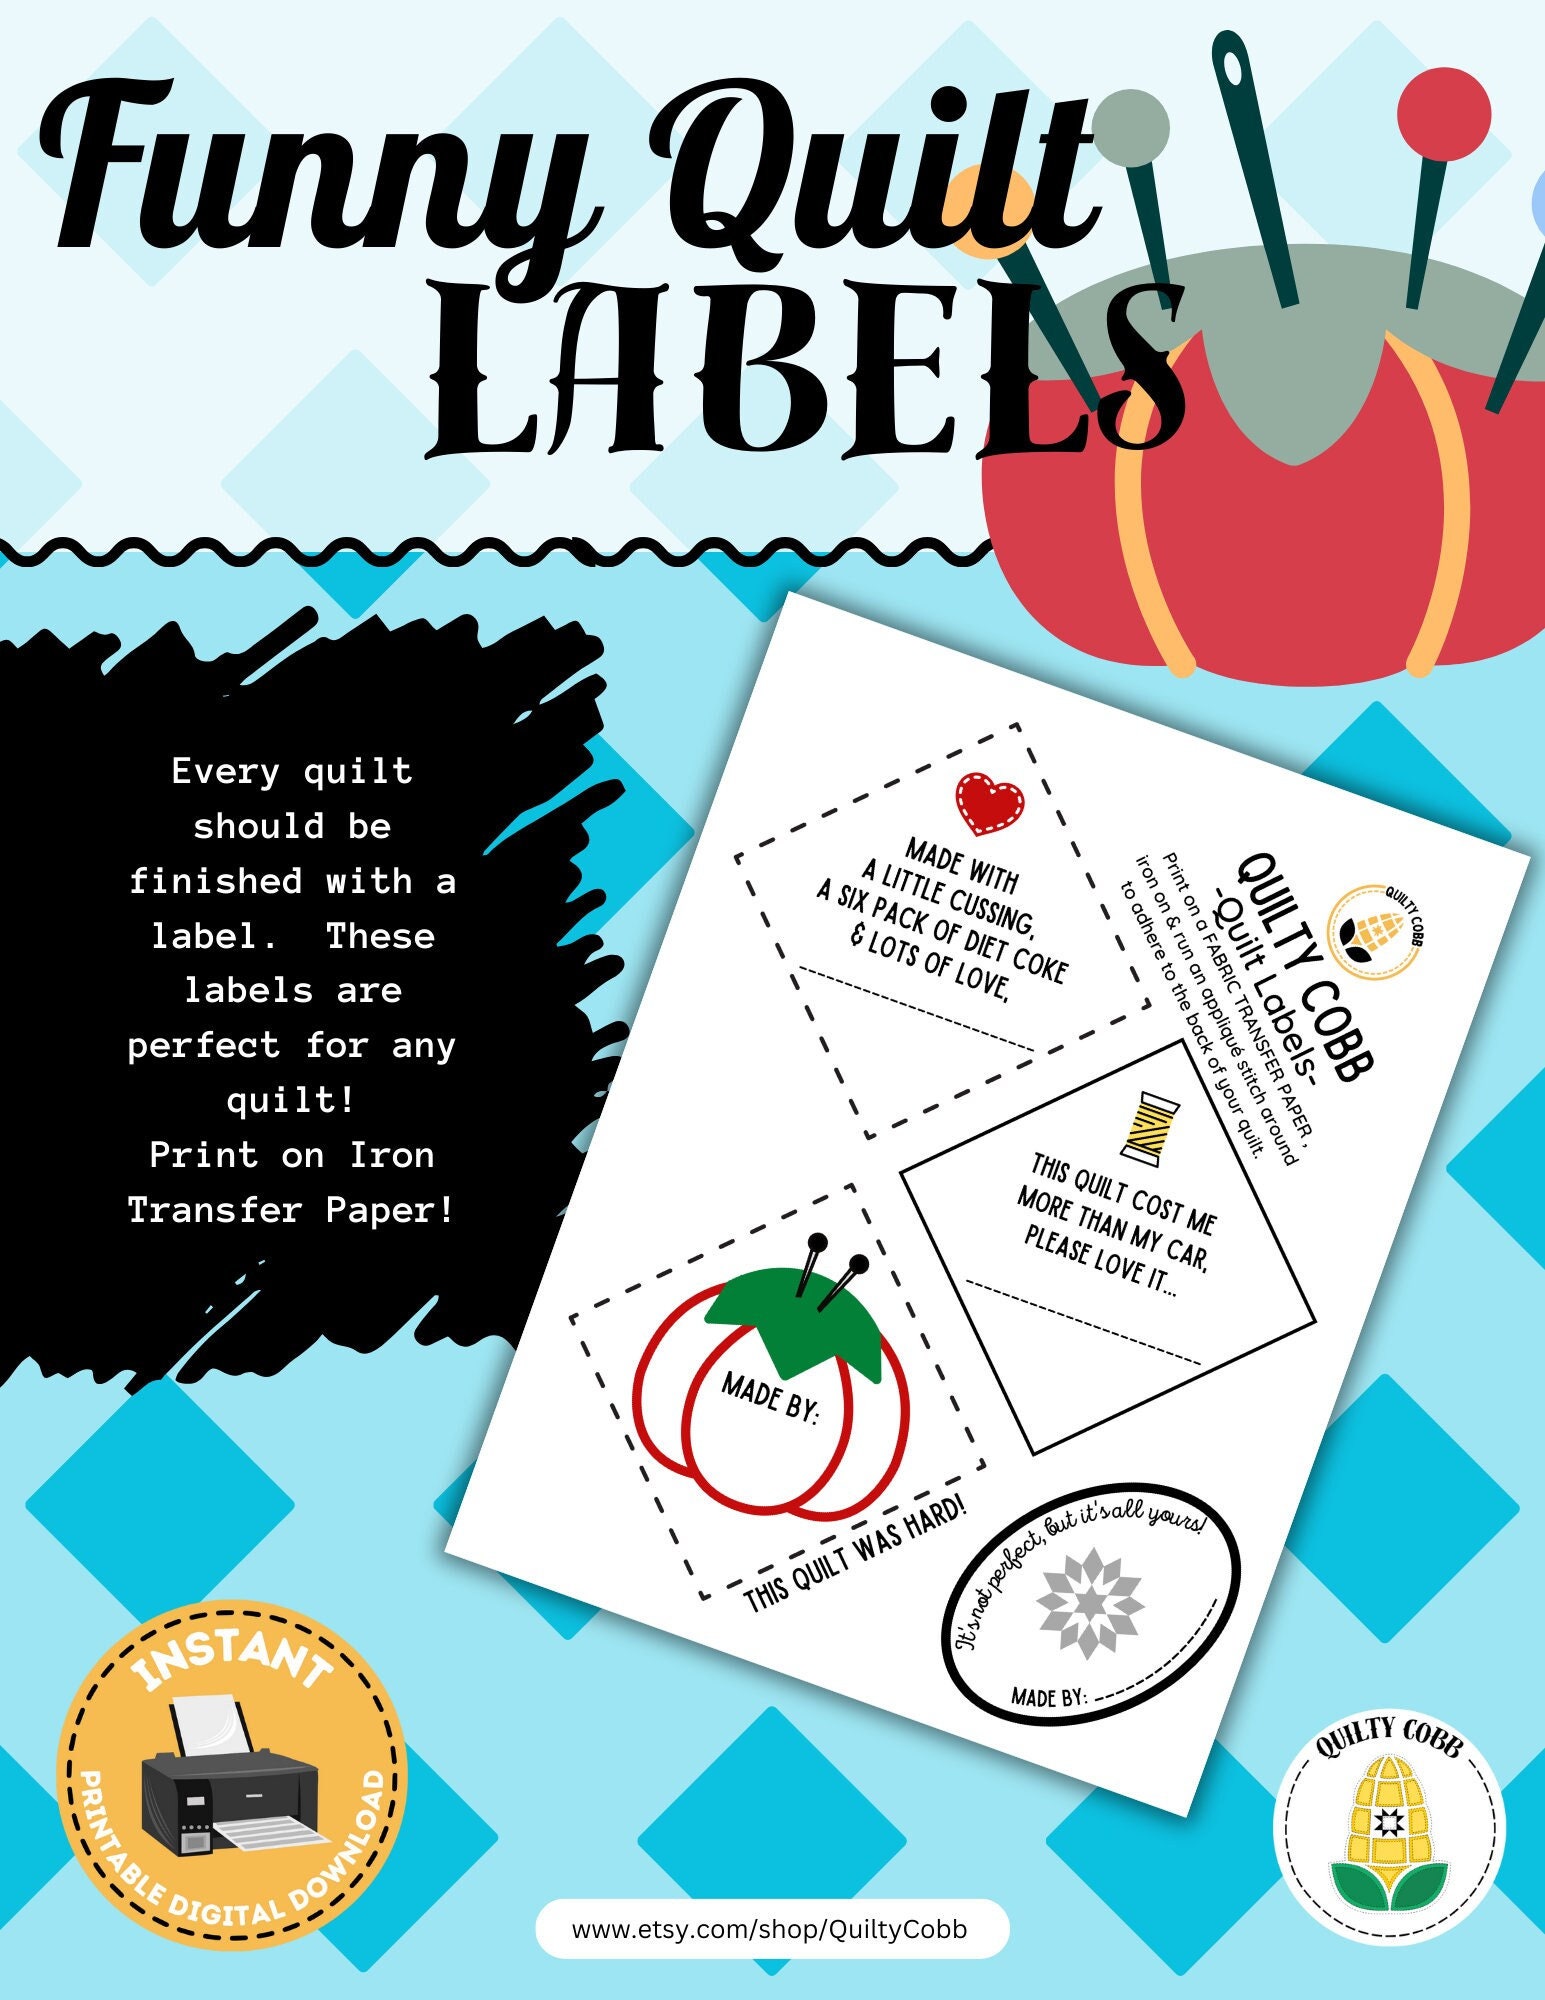 LABEL LAND Iron On Labels (120 Labels/Pack)